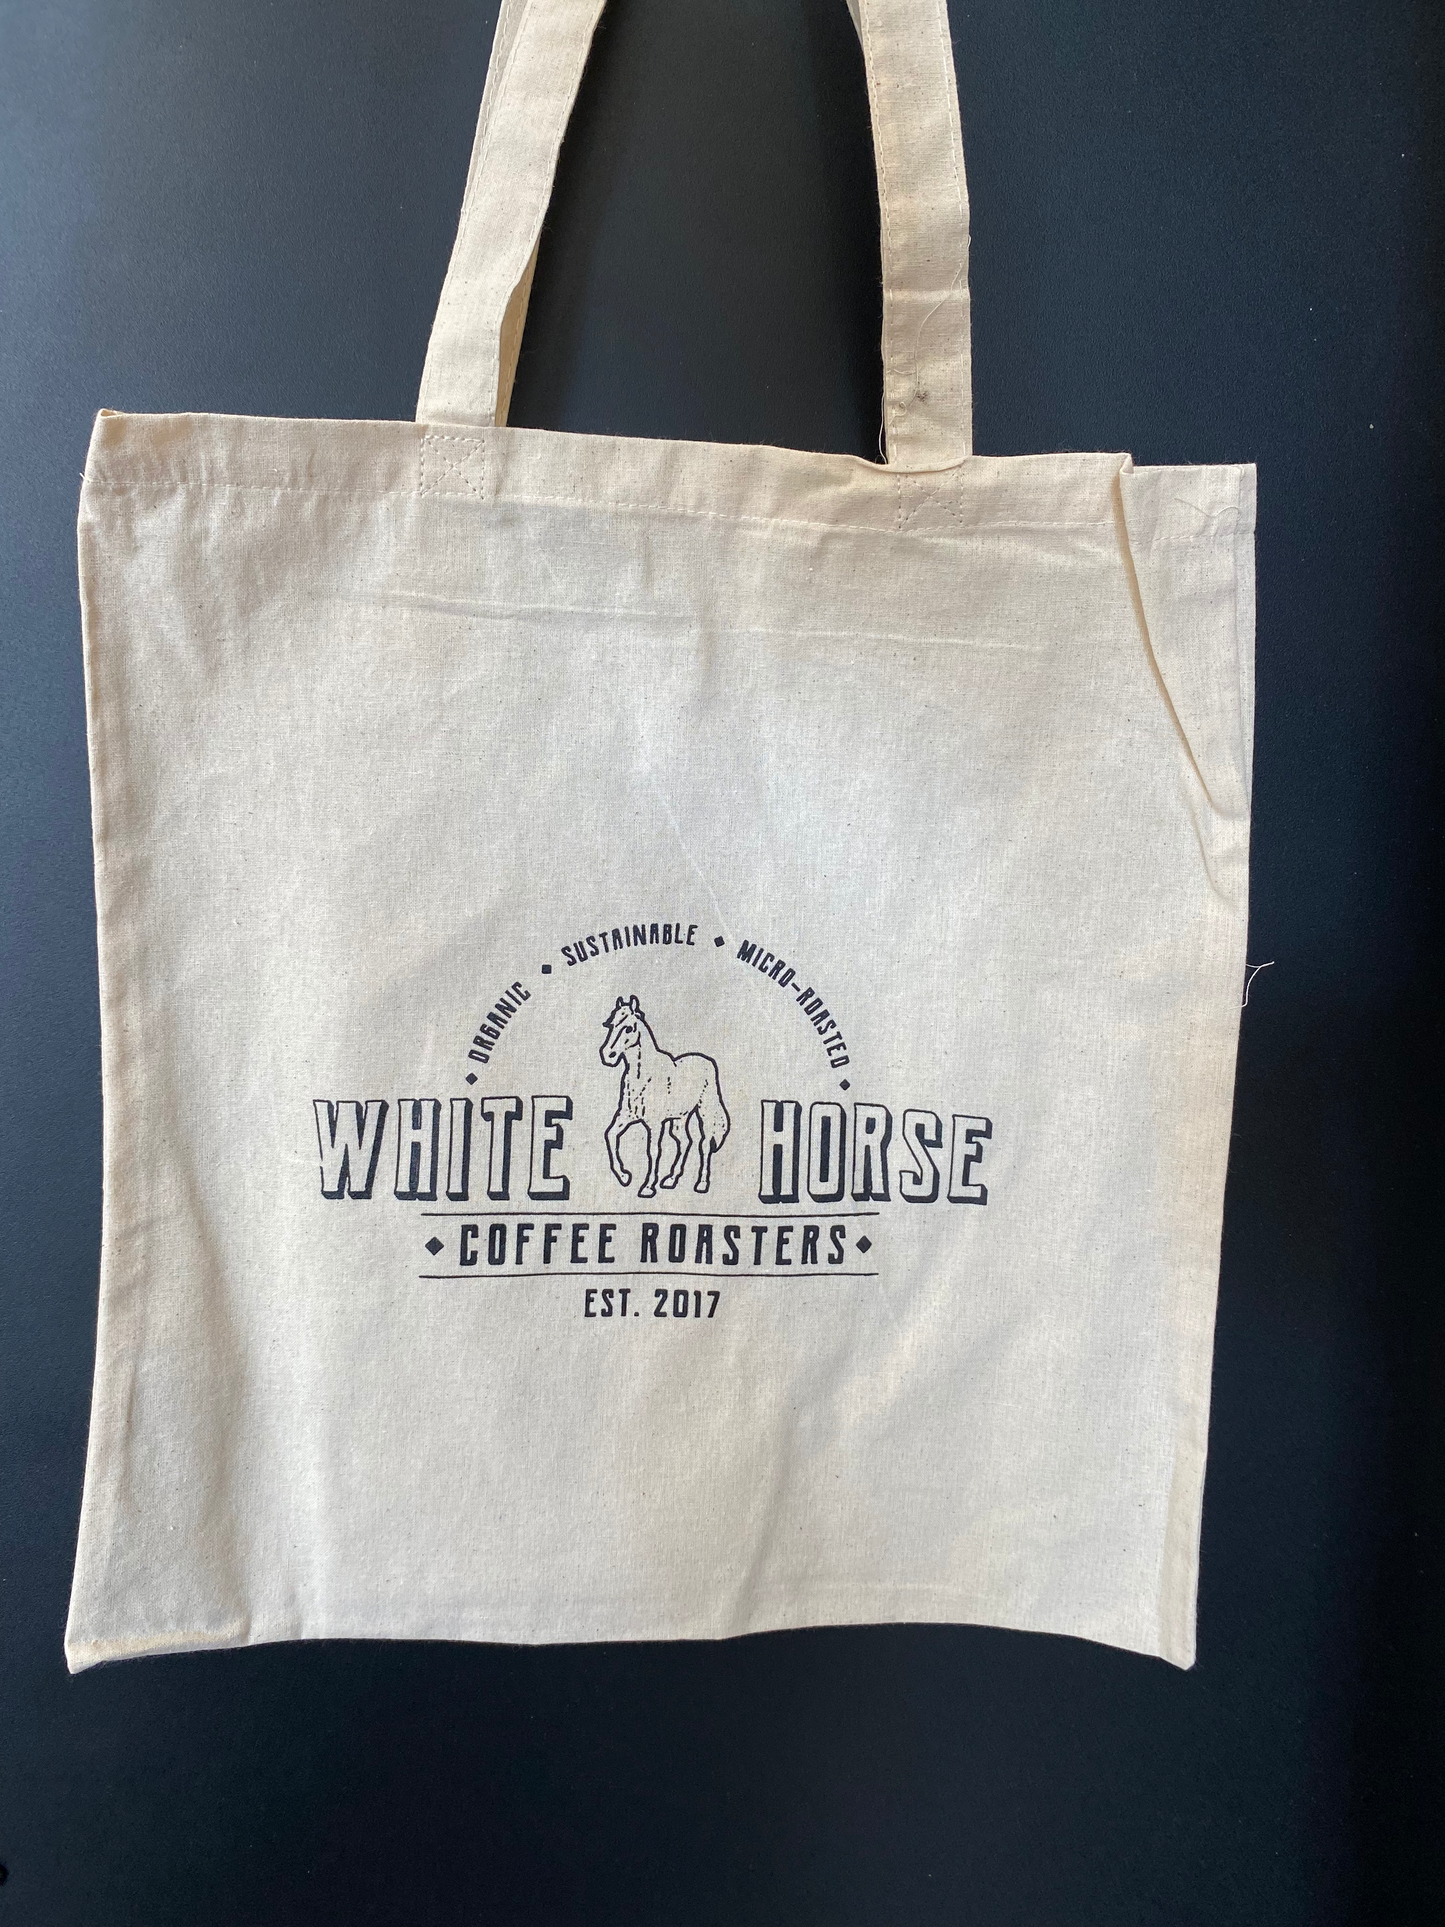 White Horse Tote Bag Exclusive - Perfect for coffee enthusiasts, this merch makes for the ultimate gift from White Horse Coffee Roasters.